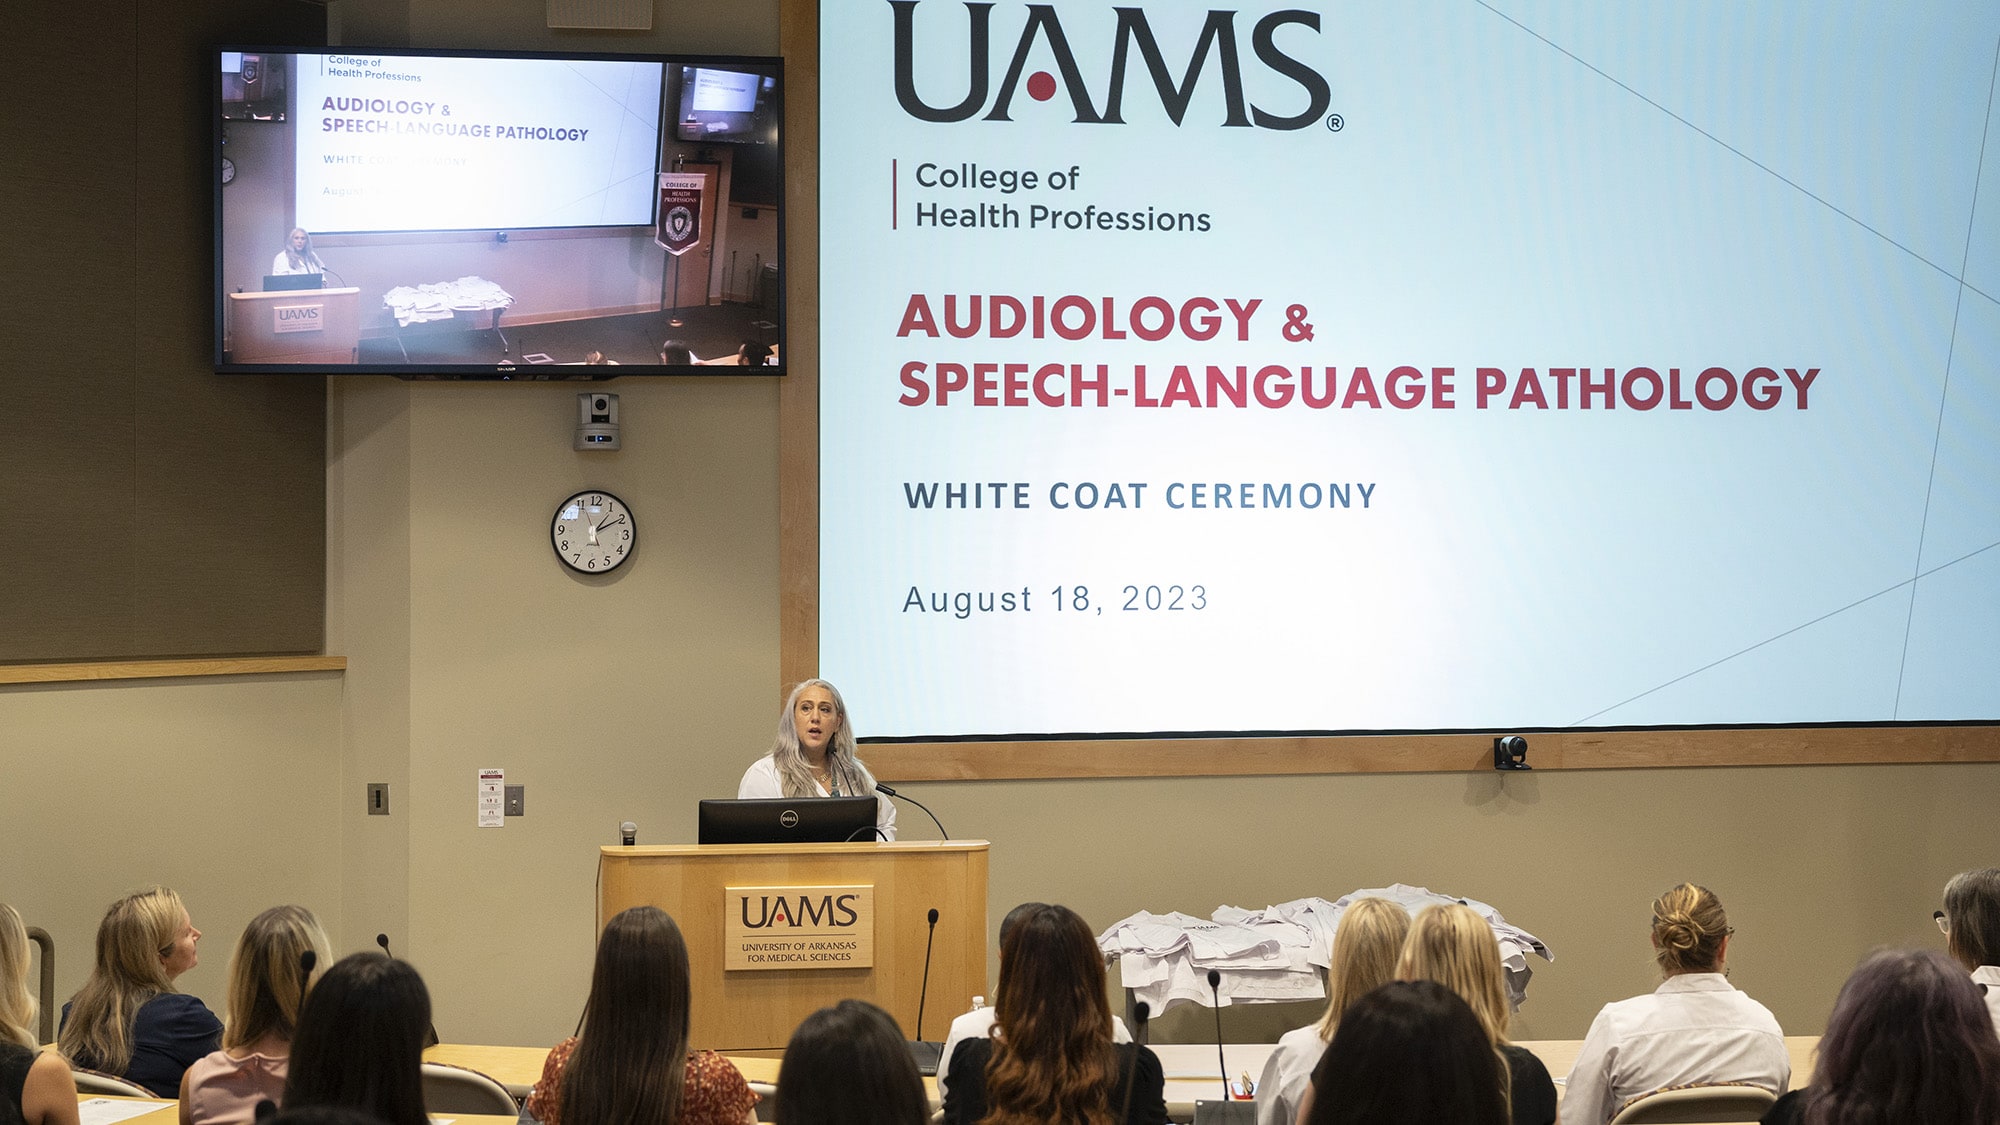 Dana Moser speaks and formally begins the Audiology & Speech-Language Pathology White Coat Ceremony in an auditorium of the I. Dodd Wilson Building on the UAMS Little Rock campus.